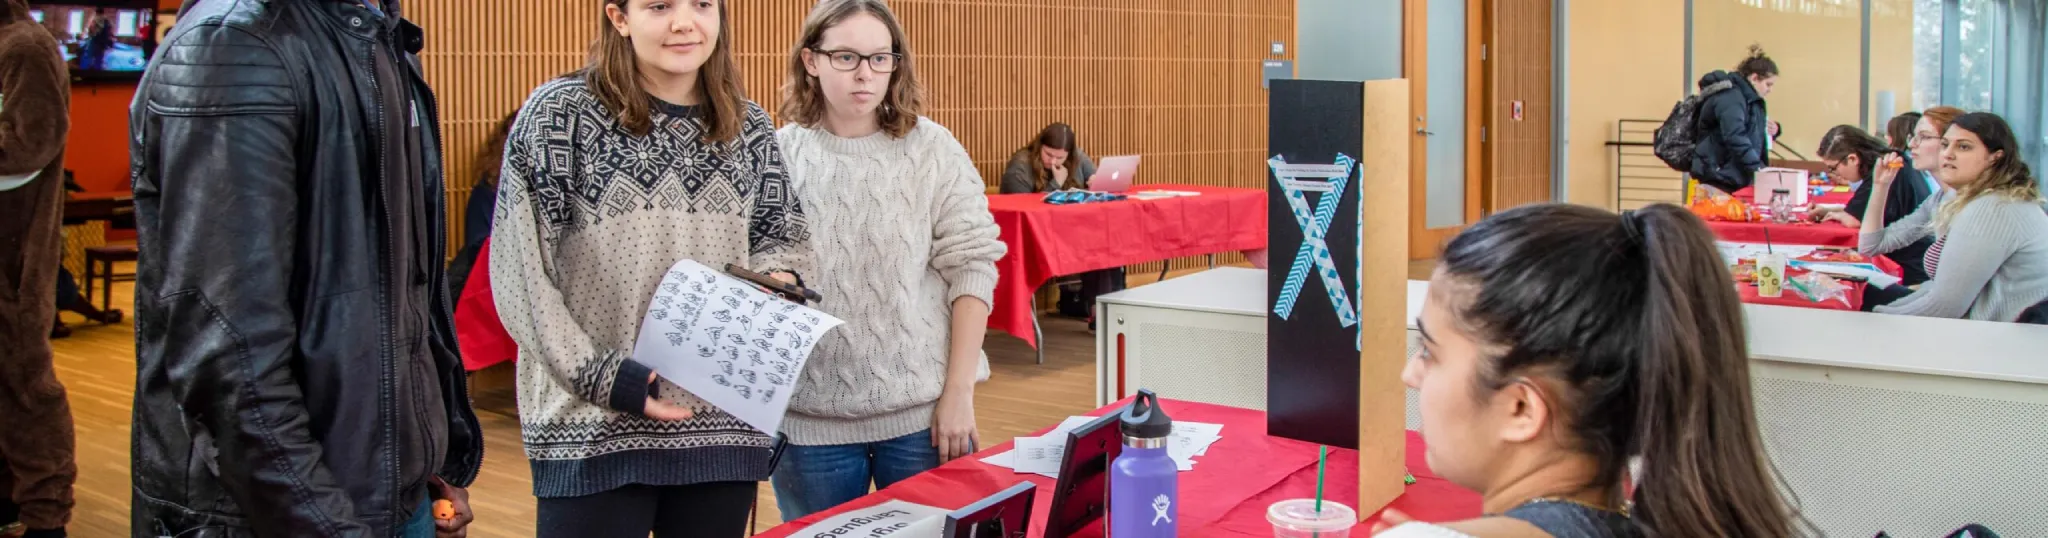 Three people at a table for an activities fair